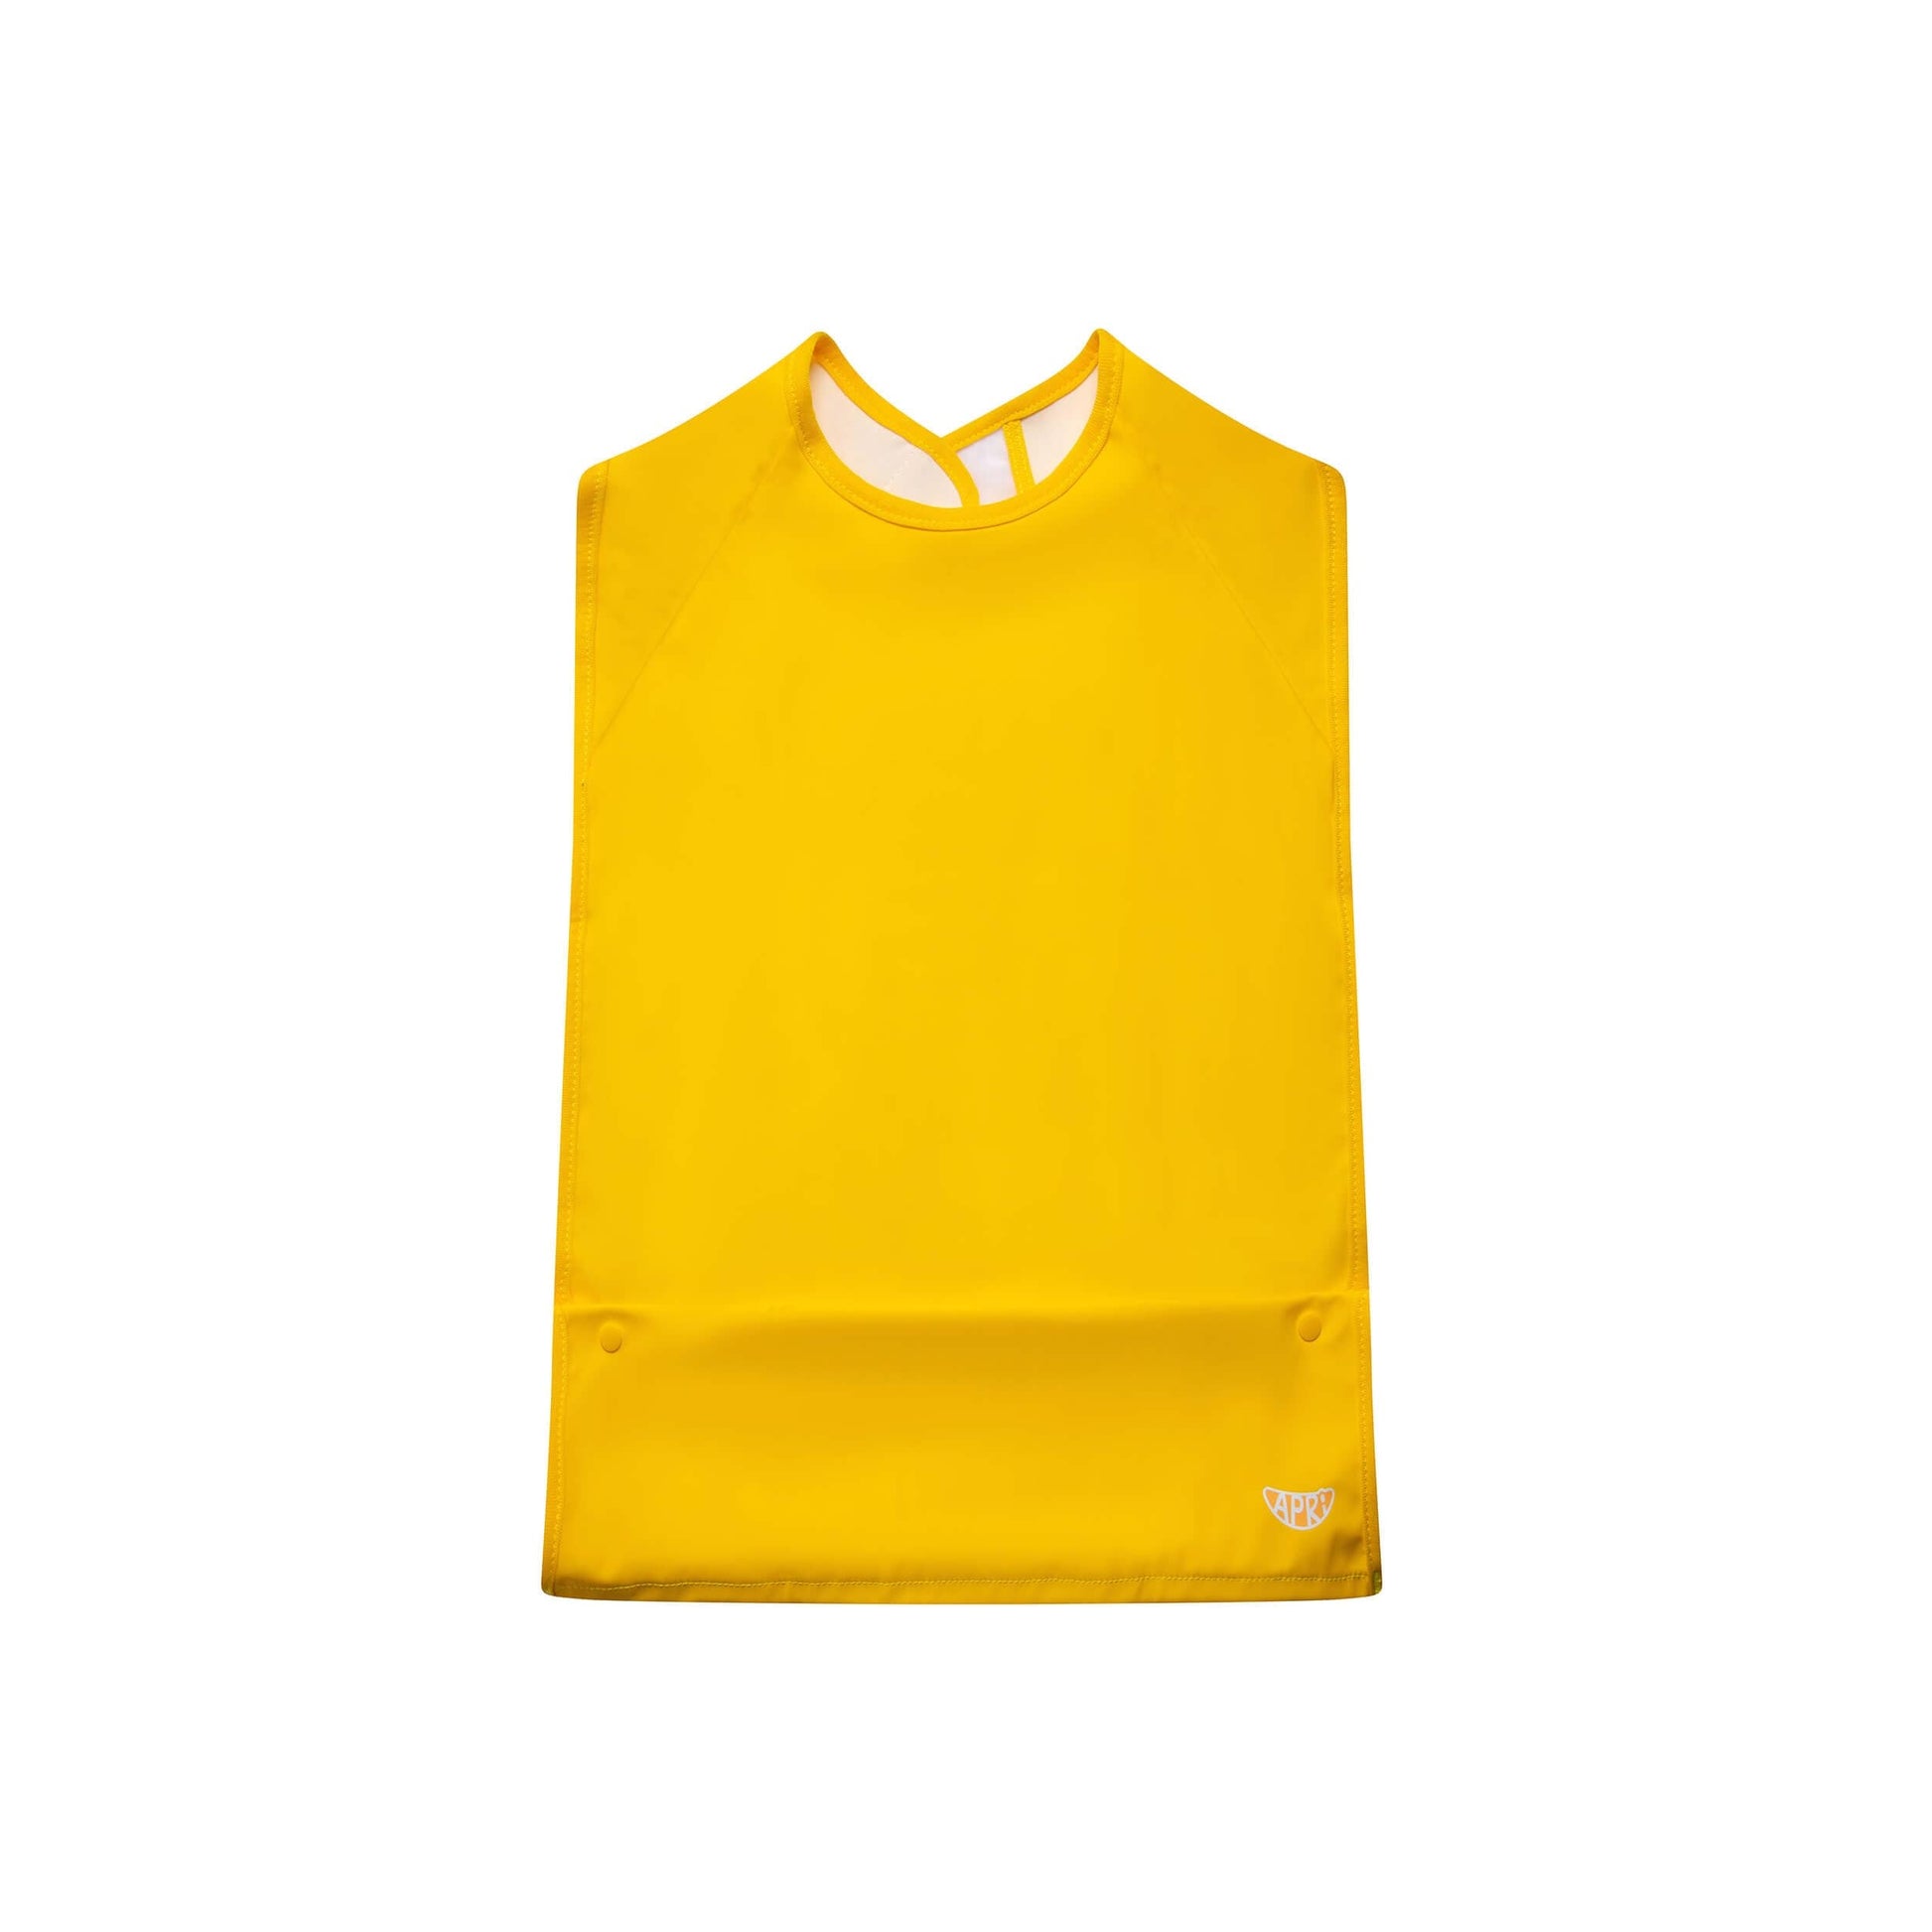 Machine washable clothes protector for adults, teens, and kids with disabilities. Innovative fastener, sleeveless sunshine yellow, and handy food pocket.